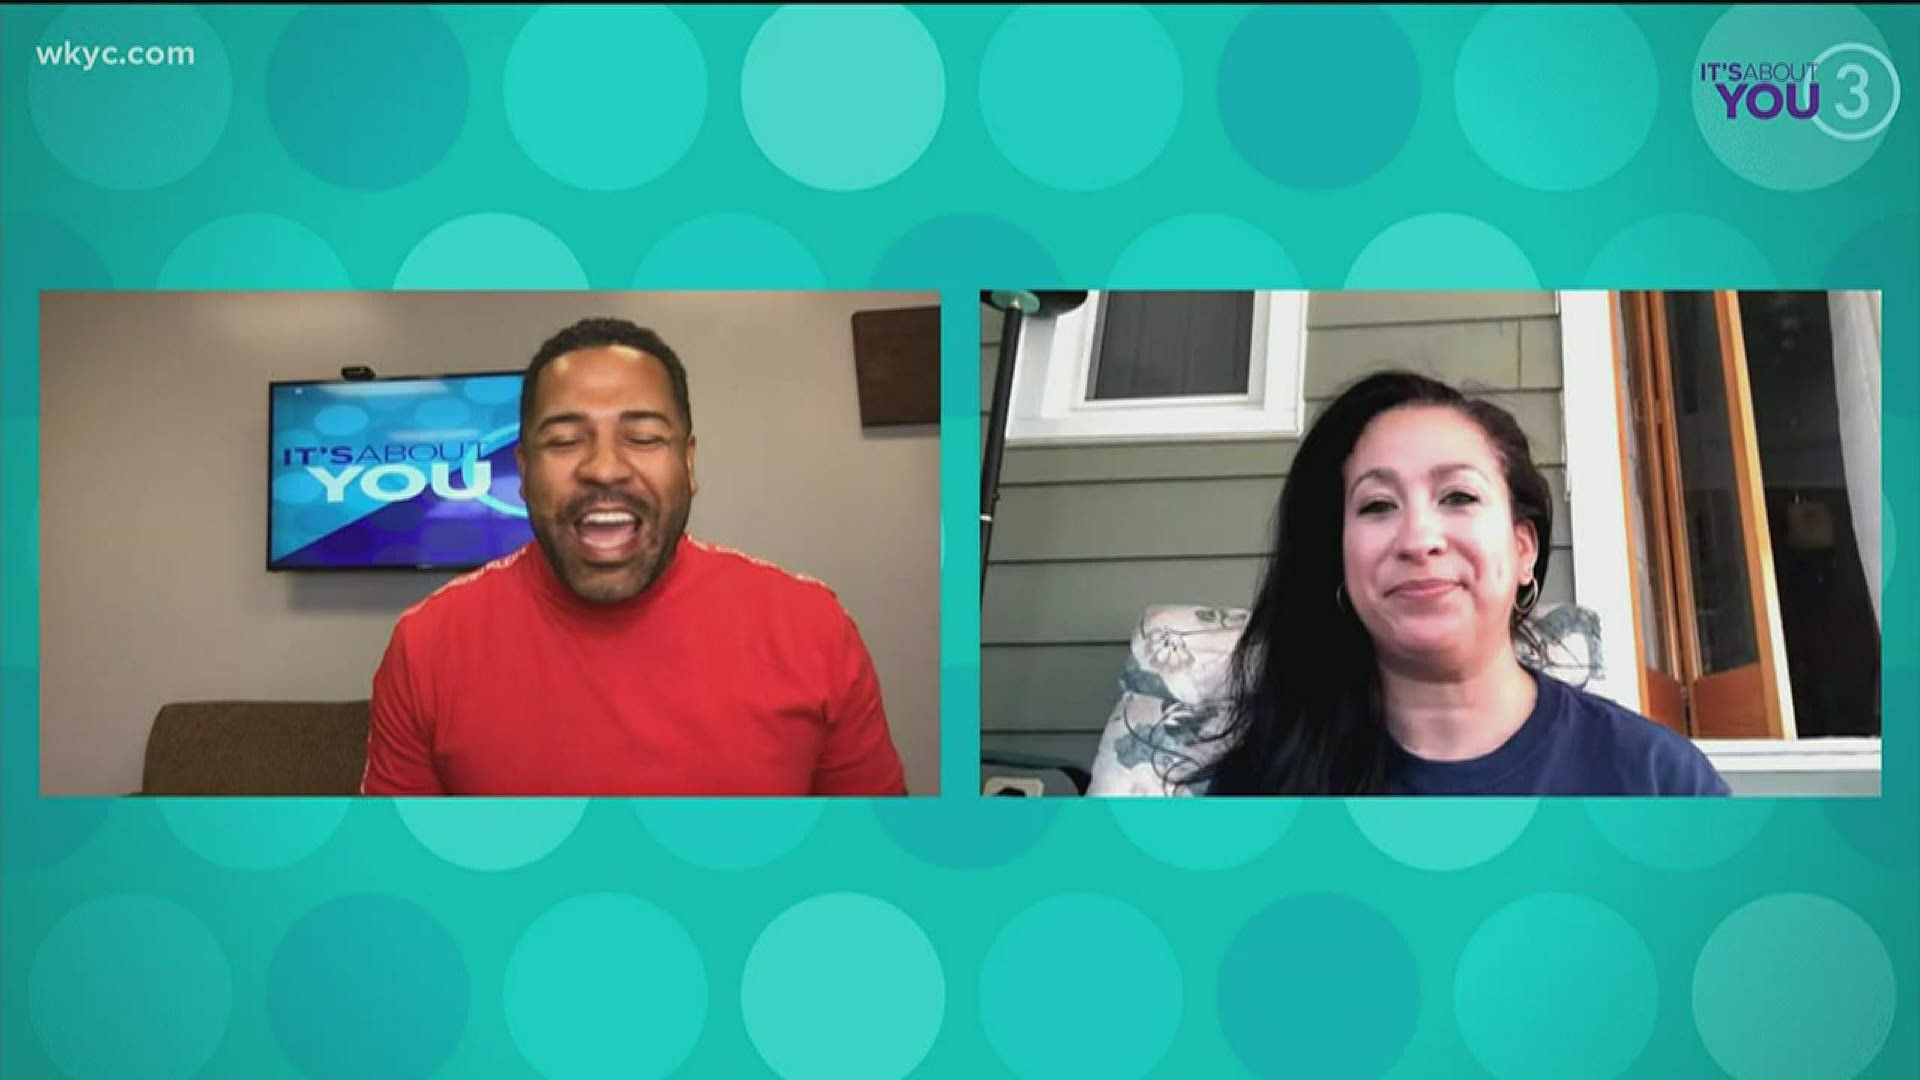 Larry Macon Jr. is back with another segment of Everyday Champion with Elisa Clark, the founder of Hispanic Filmakers of Cleveland.